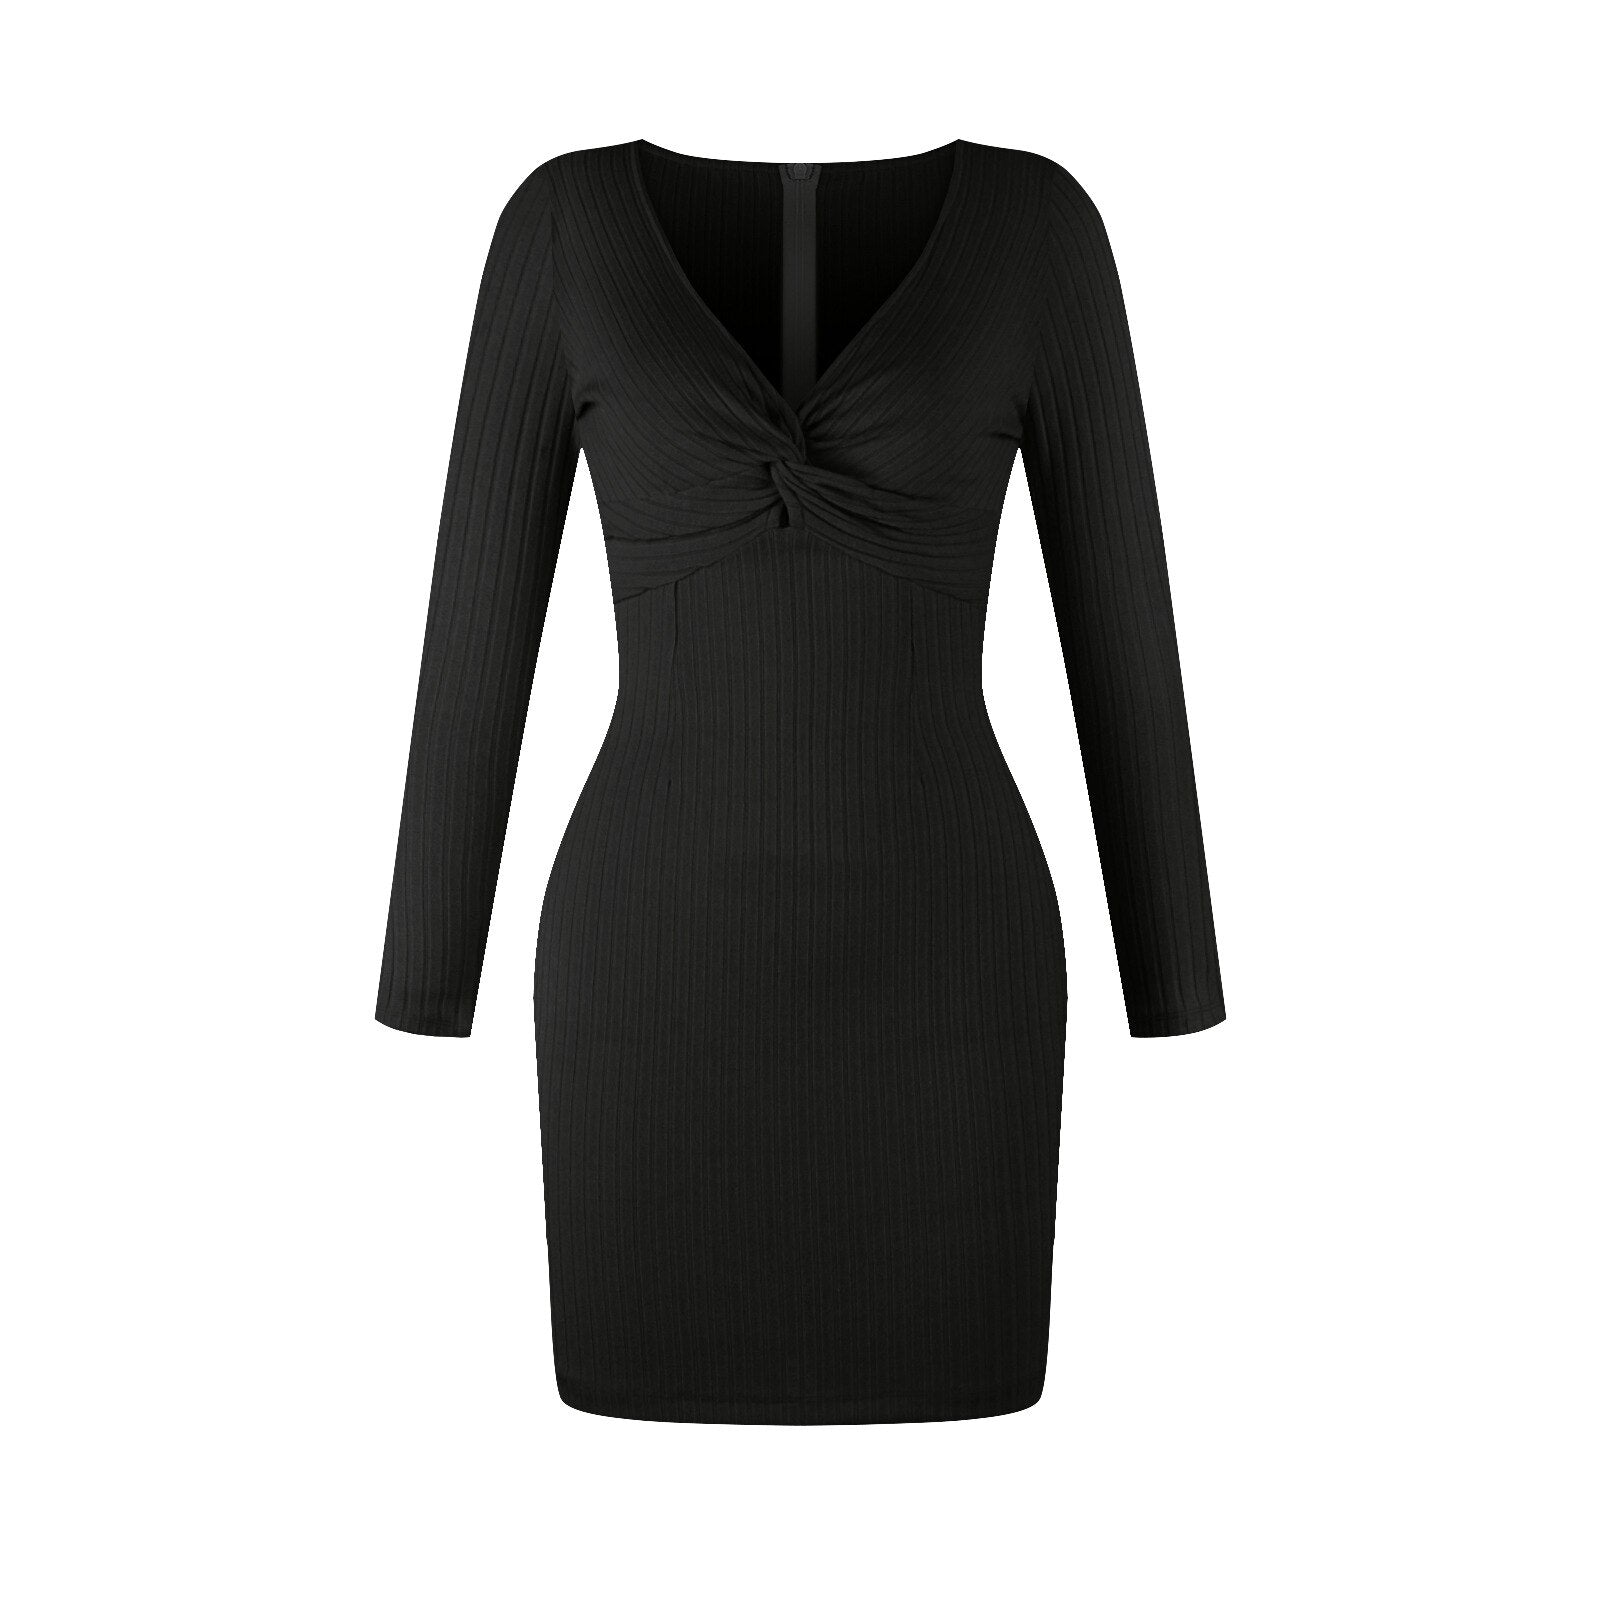 Sexy Deep V Neck Knitted Mini Dresses Women Autumn Winter  Long Sleeve Dress Ladies Skinny Hip Club Party Vestidos Mujer